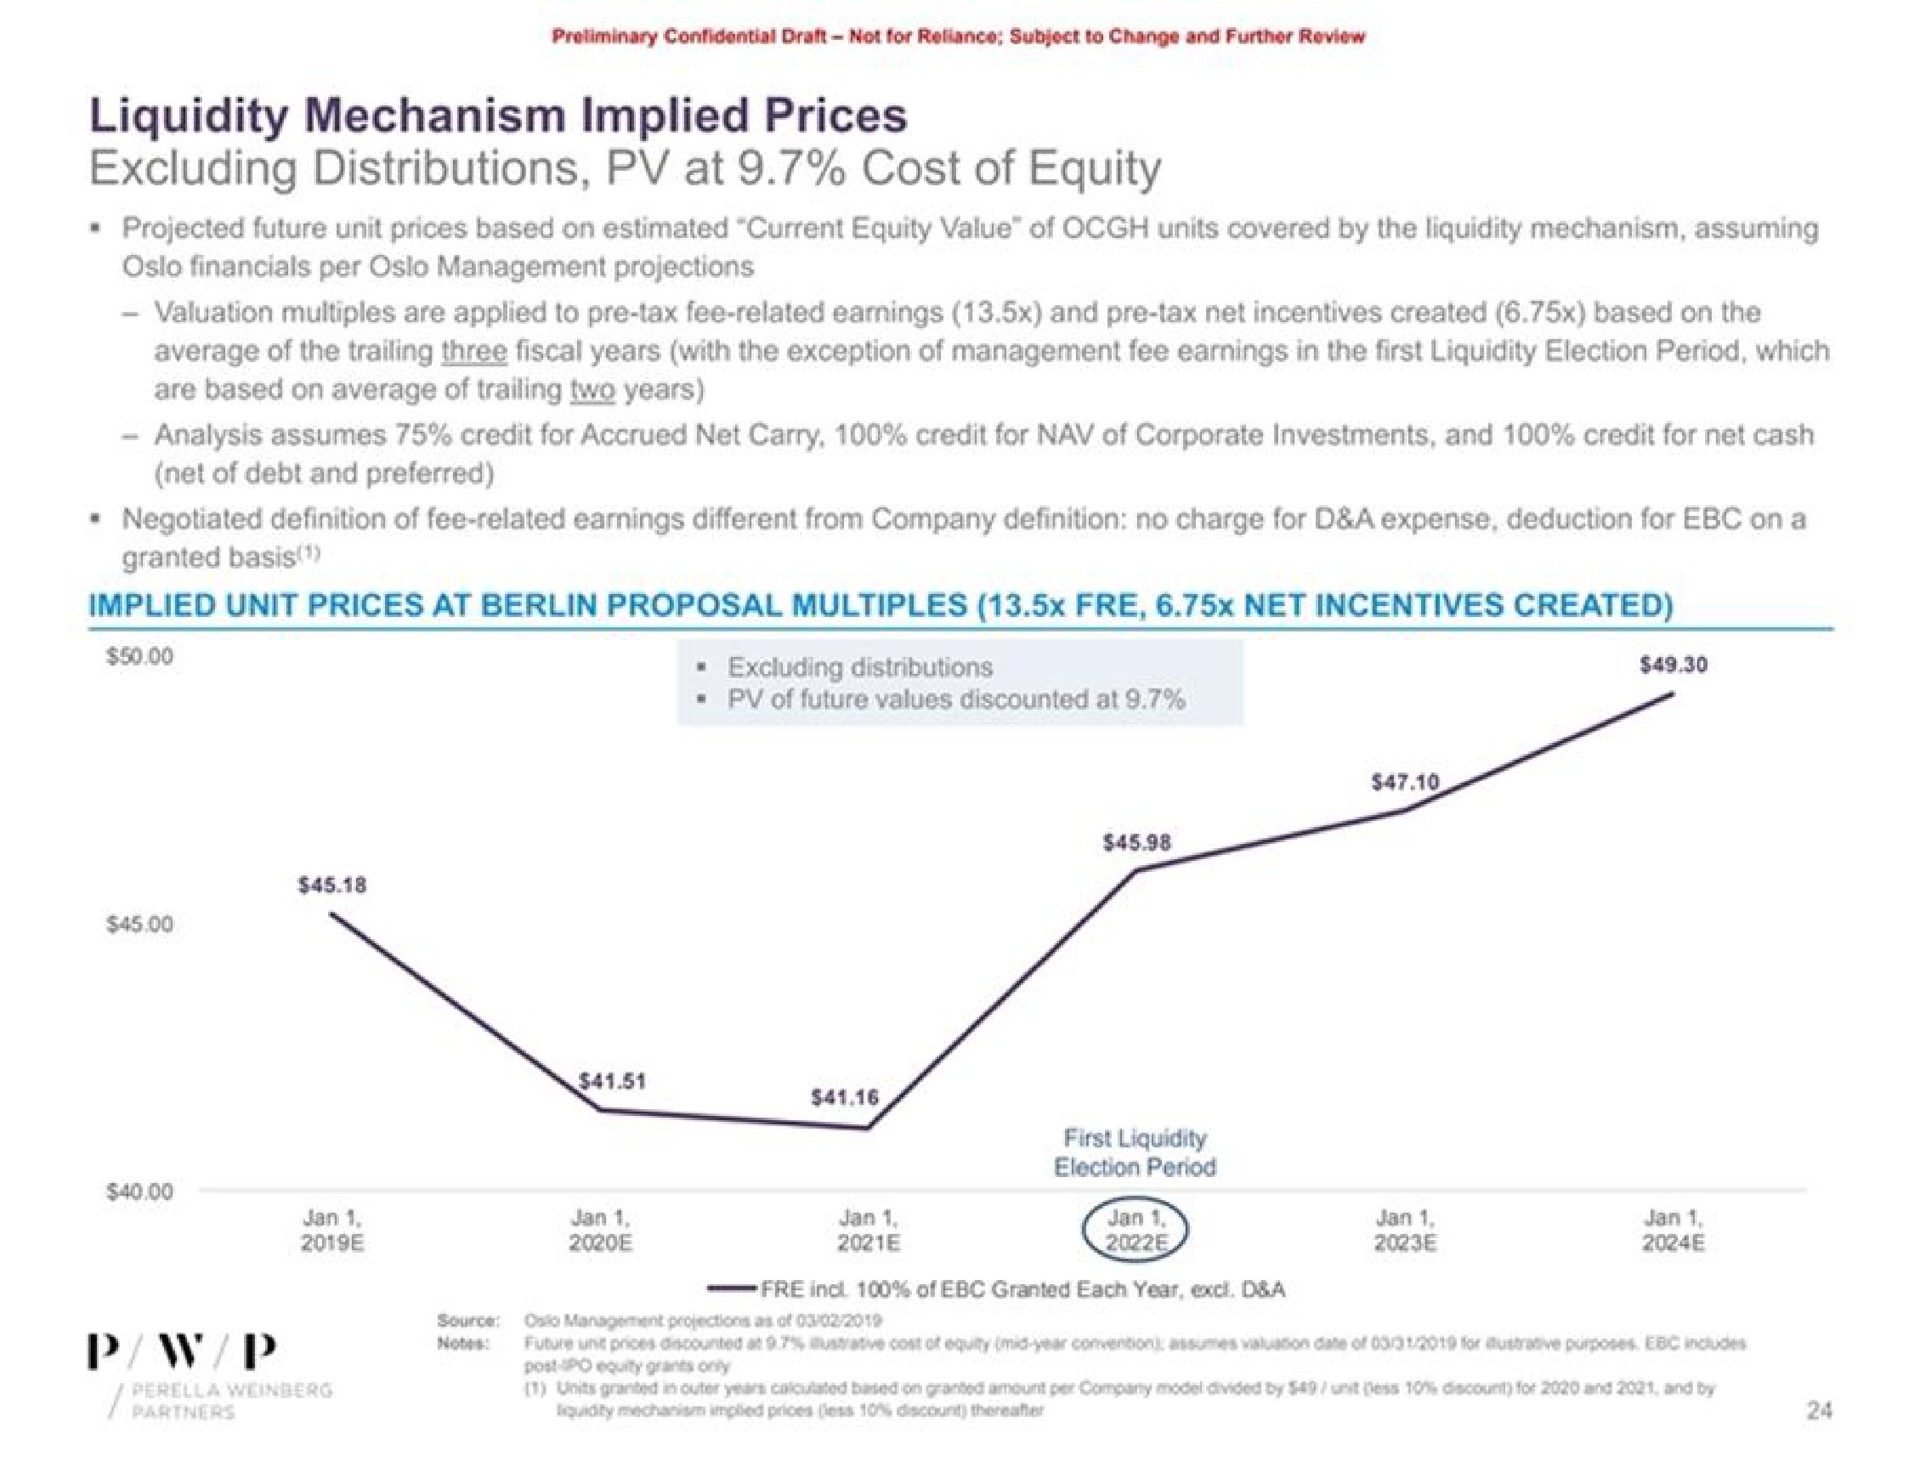 liquidity mechanism implied prices excluding distributions at cost of equity valuation multiples are applied to tax fee related earnings and tax net incentives created based on the excluding distributions first liquidity election period | Perella Weinberg Partners